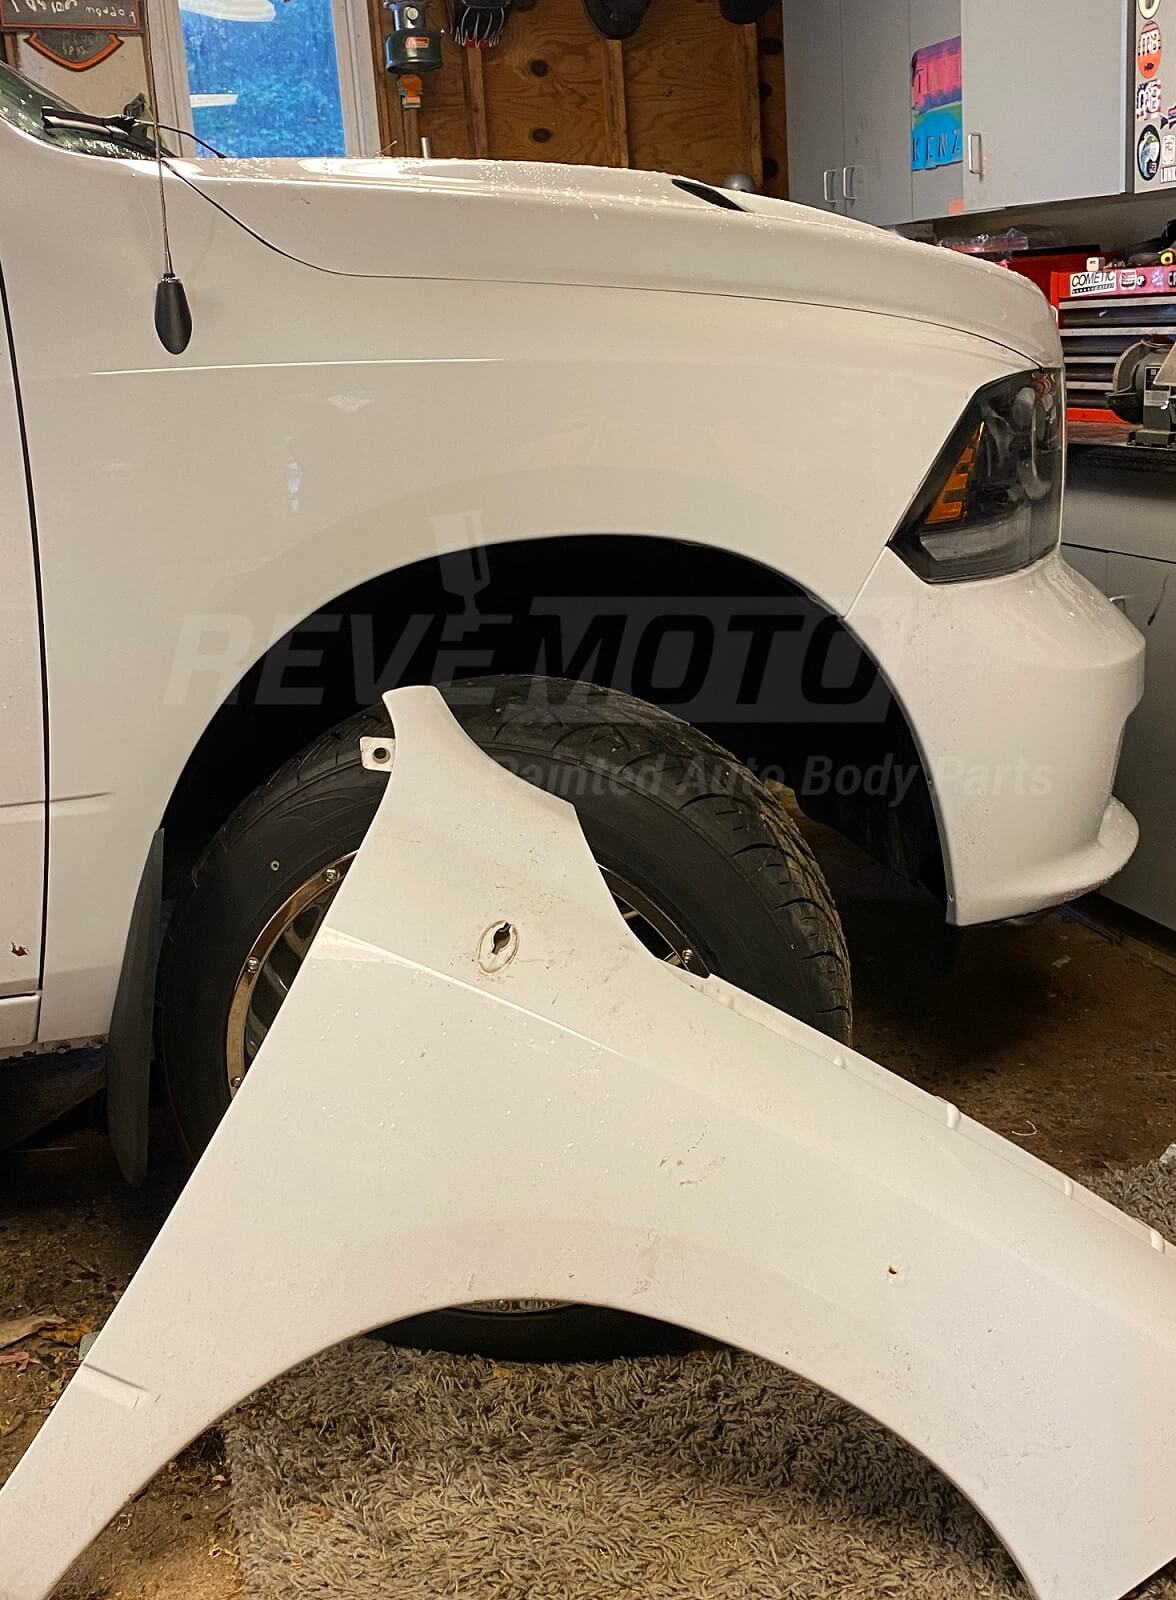 2020 Ram 1500 Classic Fender Painted Bright White - Before and After Customer Photos_ReveMoto